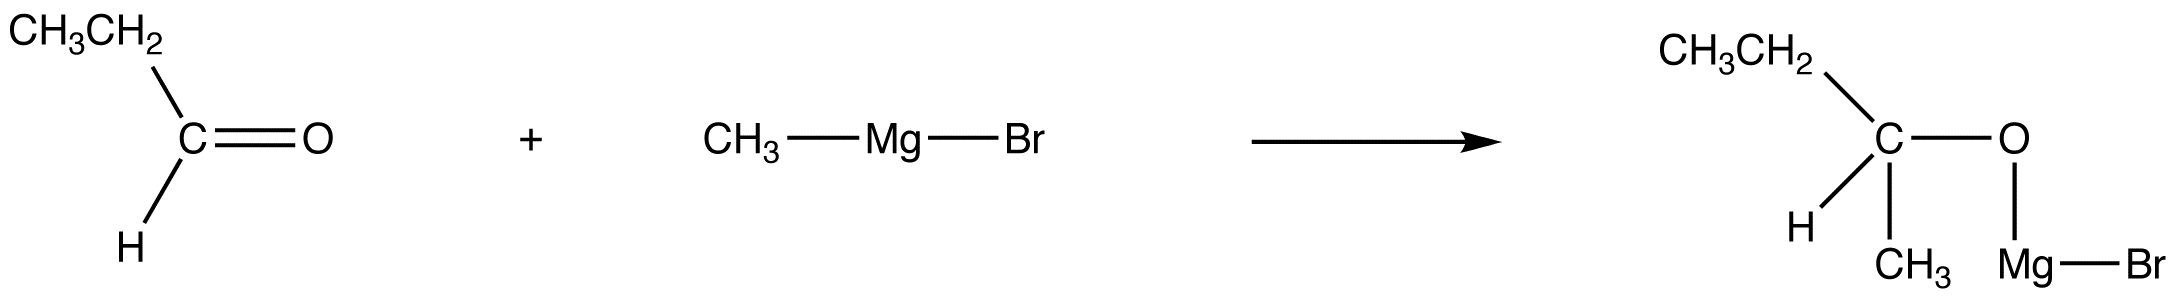 nucleophilicaddition1.png